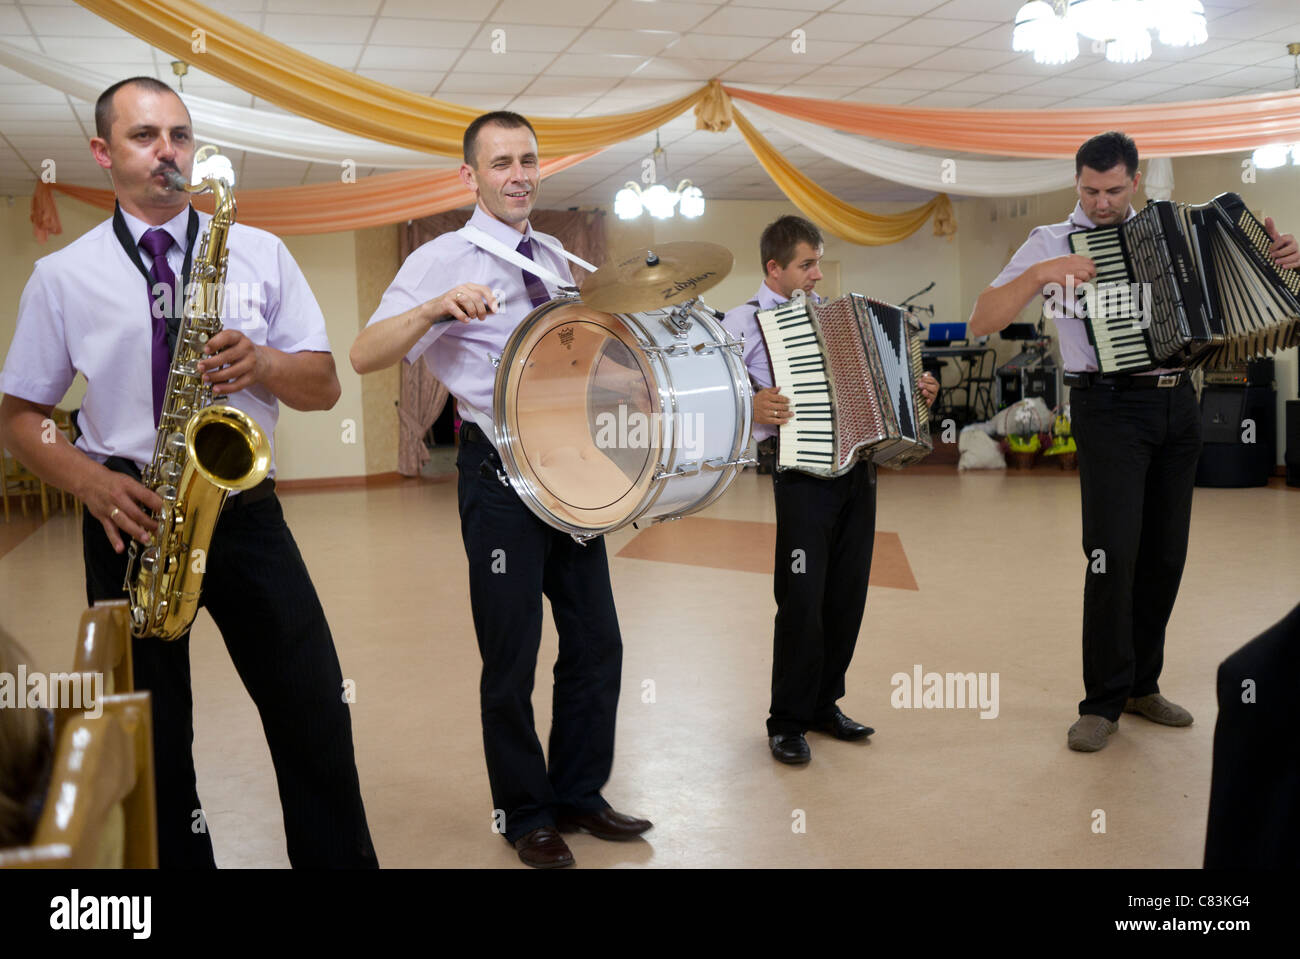 Traditional wedding ceremony and party in Poland Stock Photo